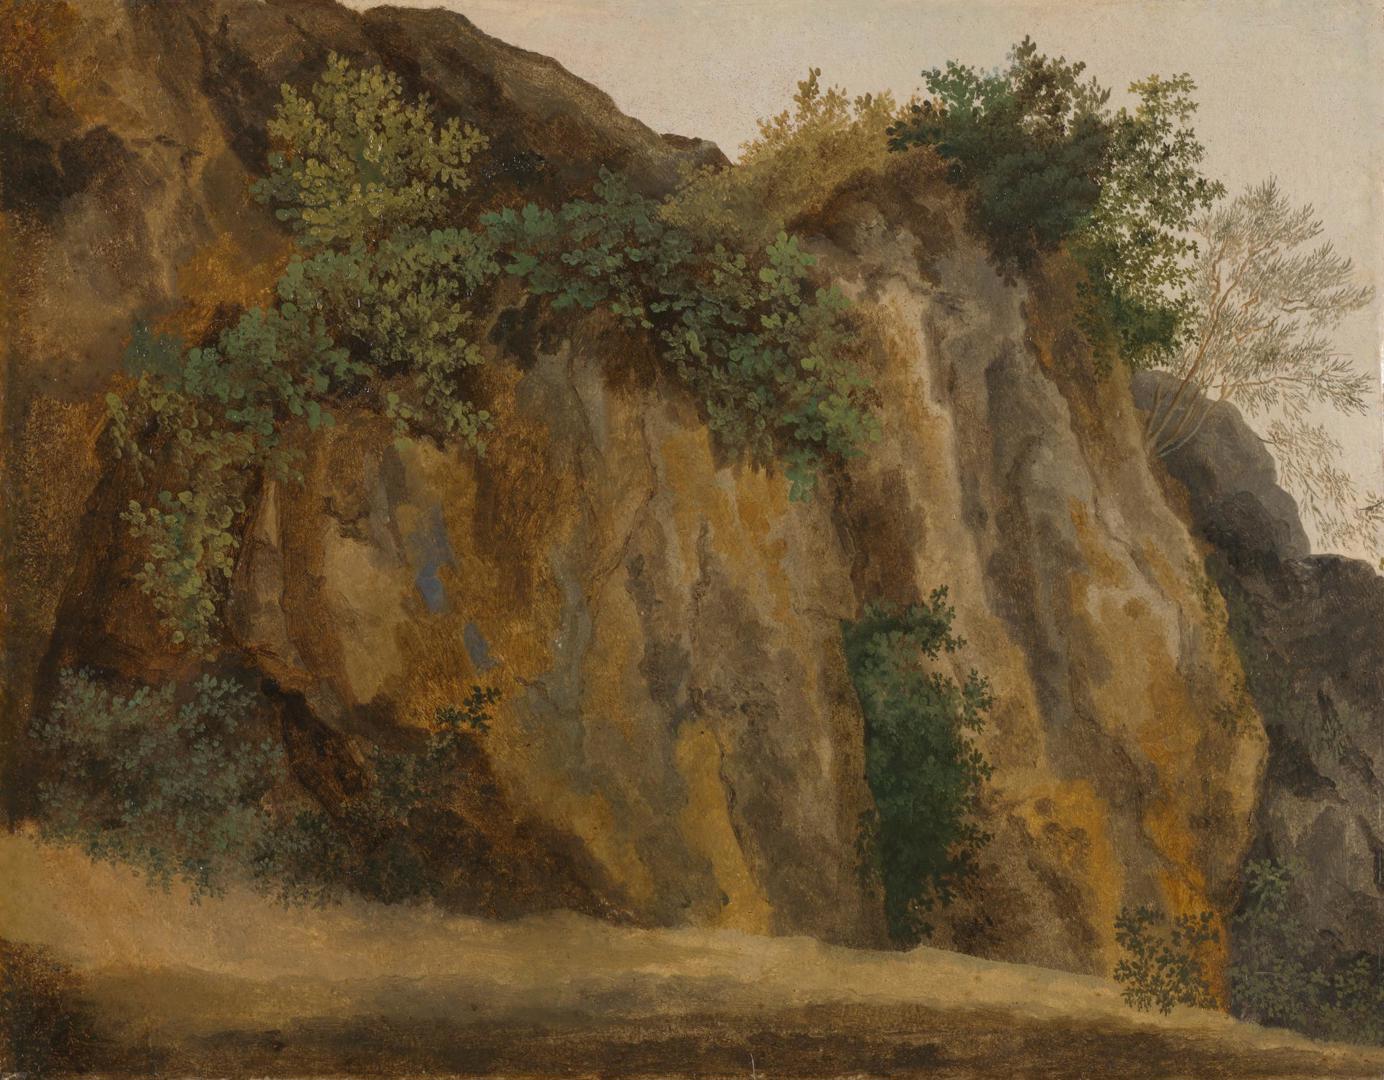 Cliff at Vicovaro by probably by Louis Gauffier